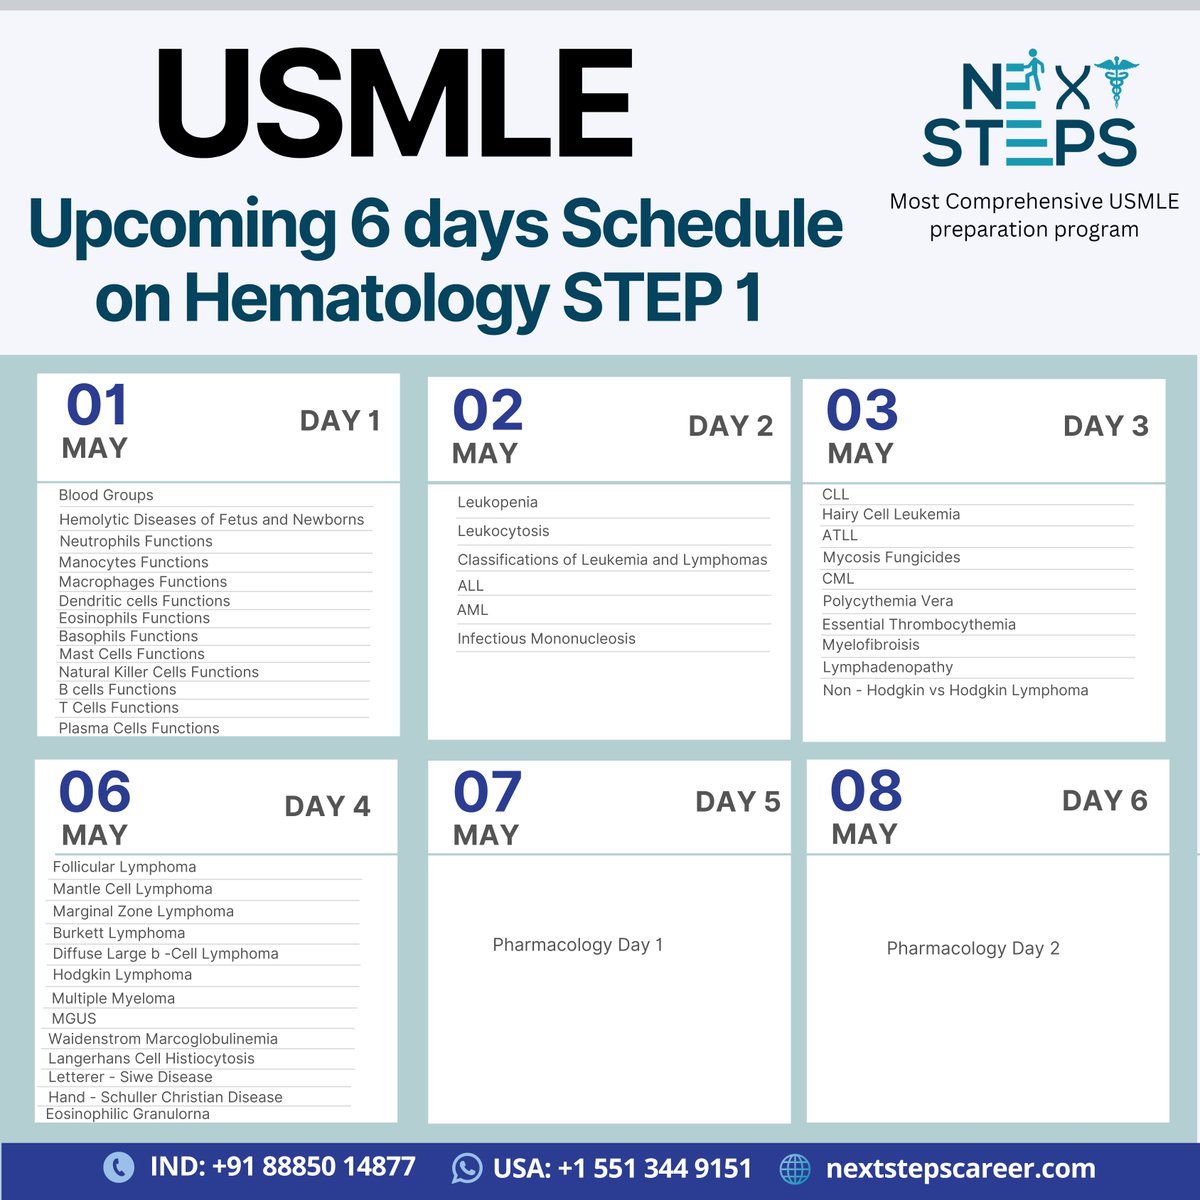 Dive into Hematology in our 6-day Step 1 USMLE schedule! Master key concepts and elevate your prep. Enroll now!
Enroll Here: nextstepscareer.com/enroll-now/

#nextstepsusmle #Step1 #step2ck #usmle #usmlepreparation #USMLEPrep #nextsteps #nextstepsusmle #NextStepSuccess